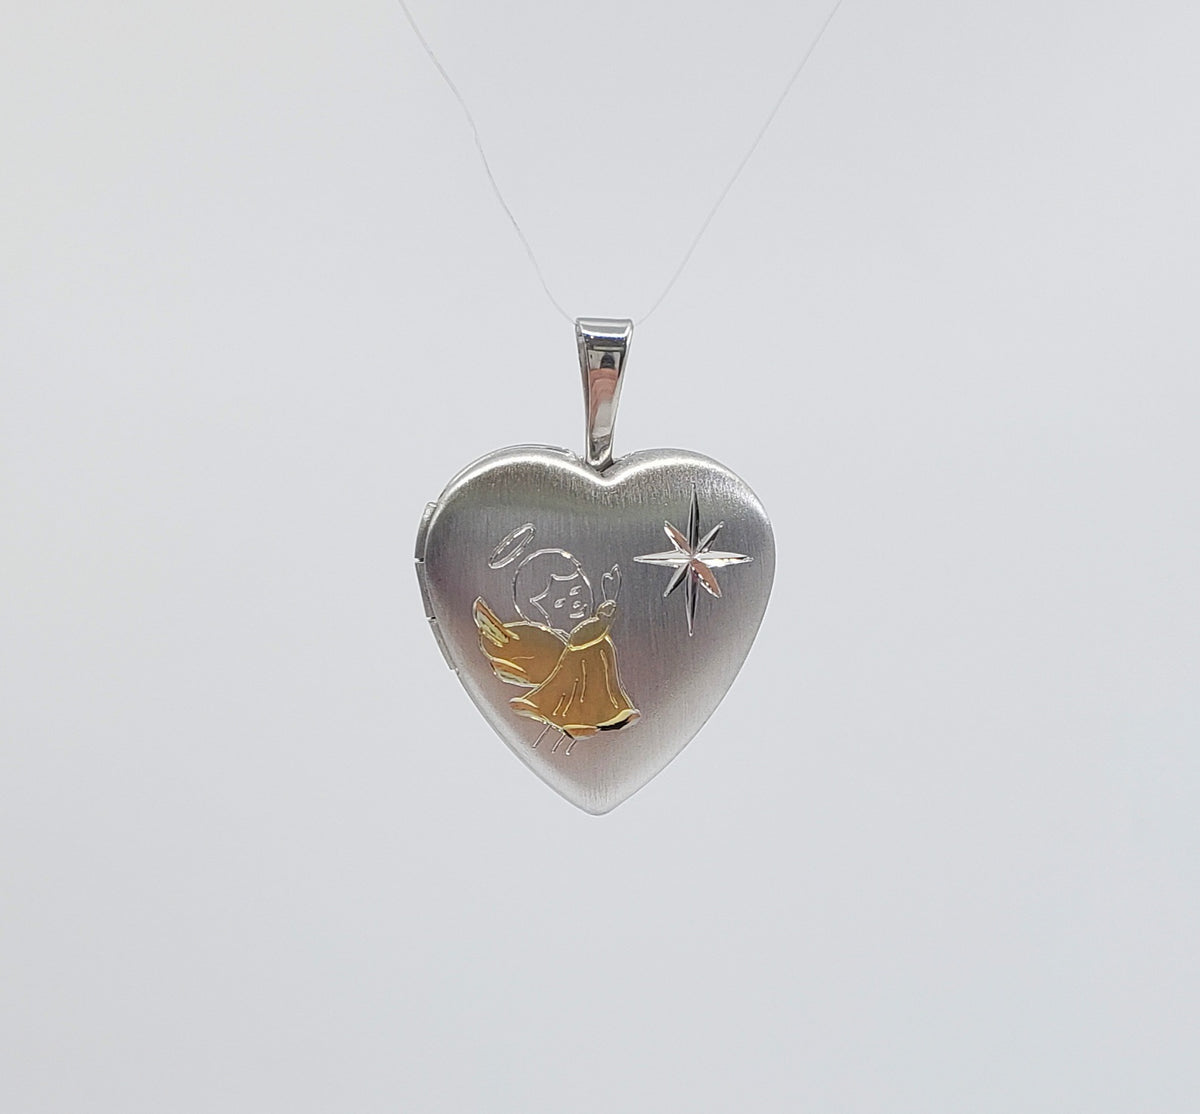 925 Sterling Silver with Angel Etched in Gold Plating Locket - 16mm x 17mm